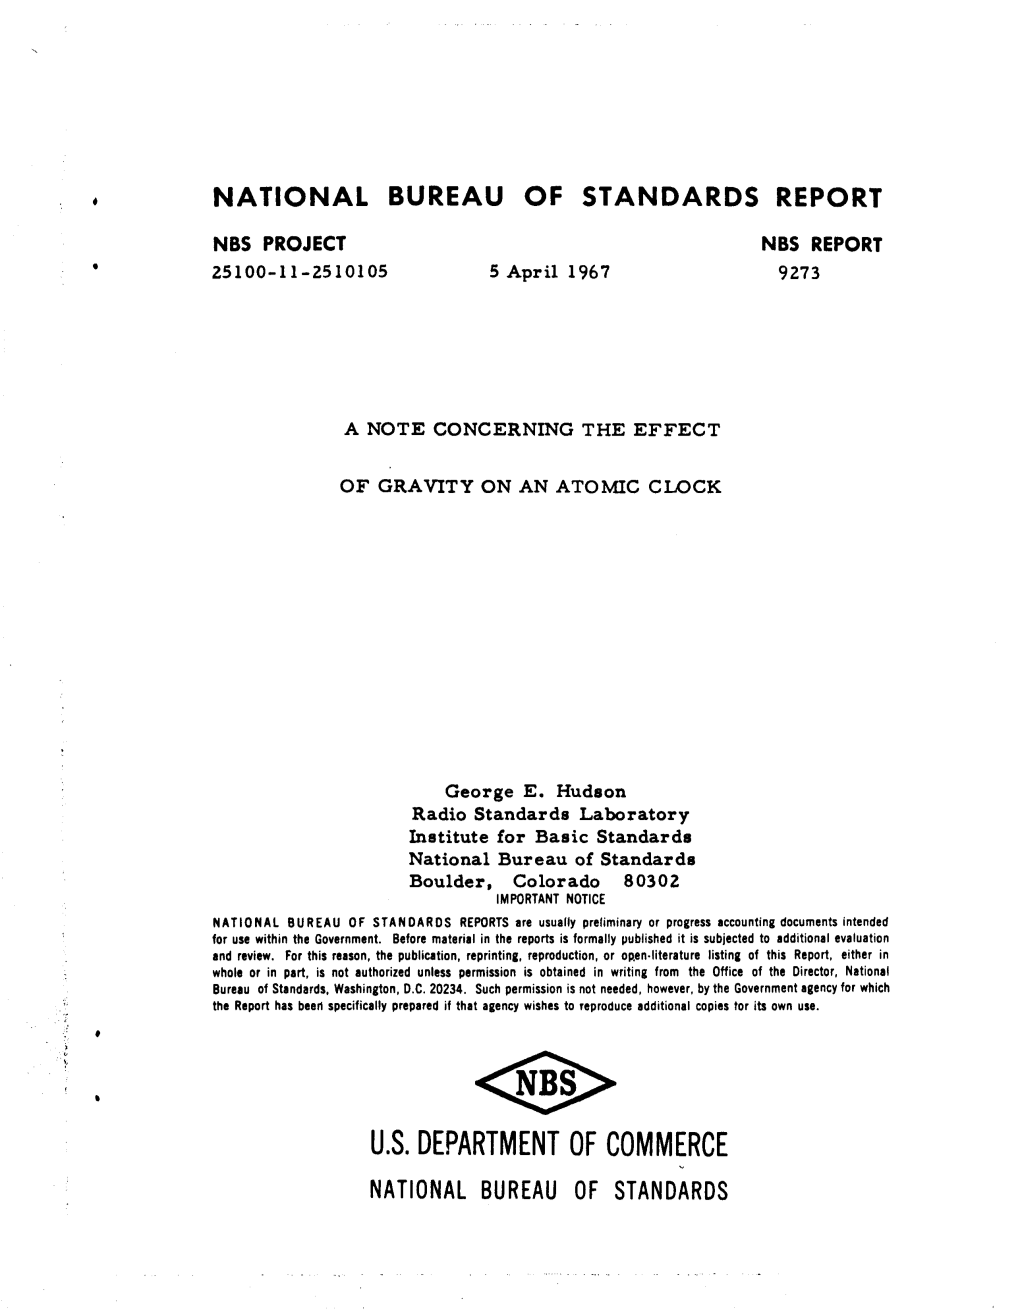 US. DEPARTMENT of COMMERCE NATIONAL BUREAU of STANDARDS a NOTE CONCERNING the EFFECT of GRAVITY on an ATOMIC CLOCK George E